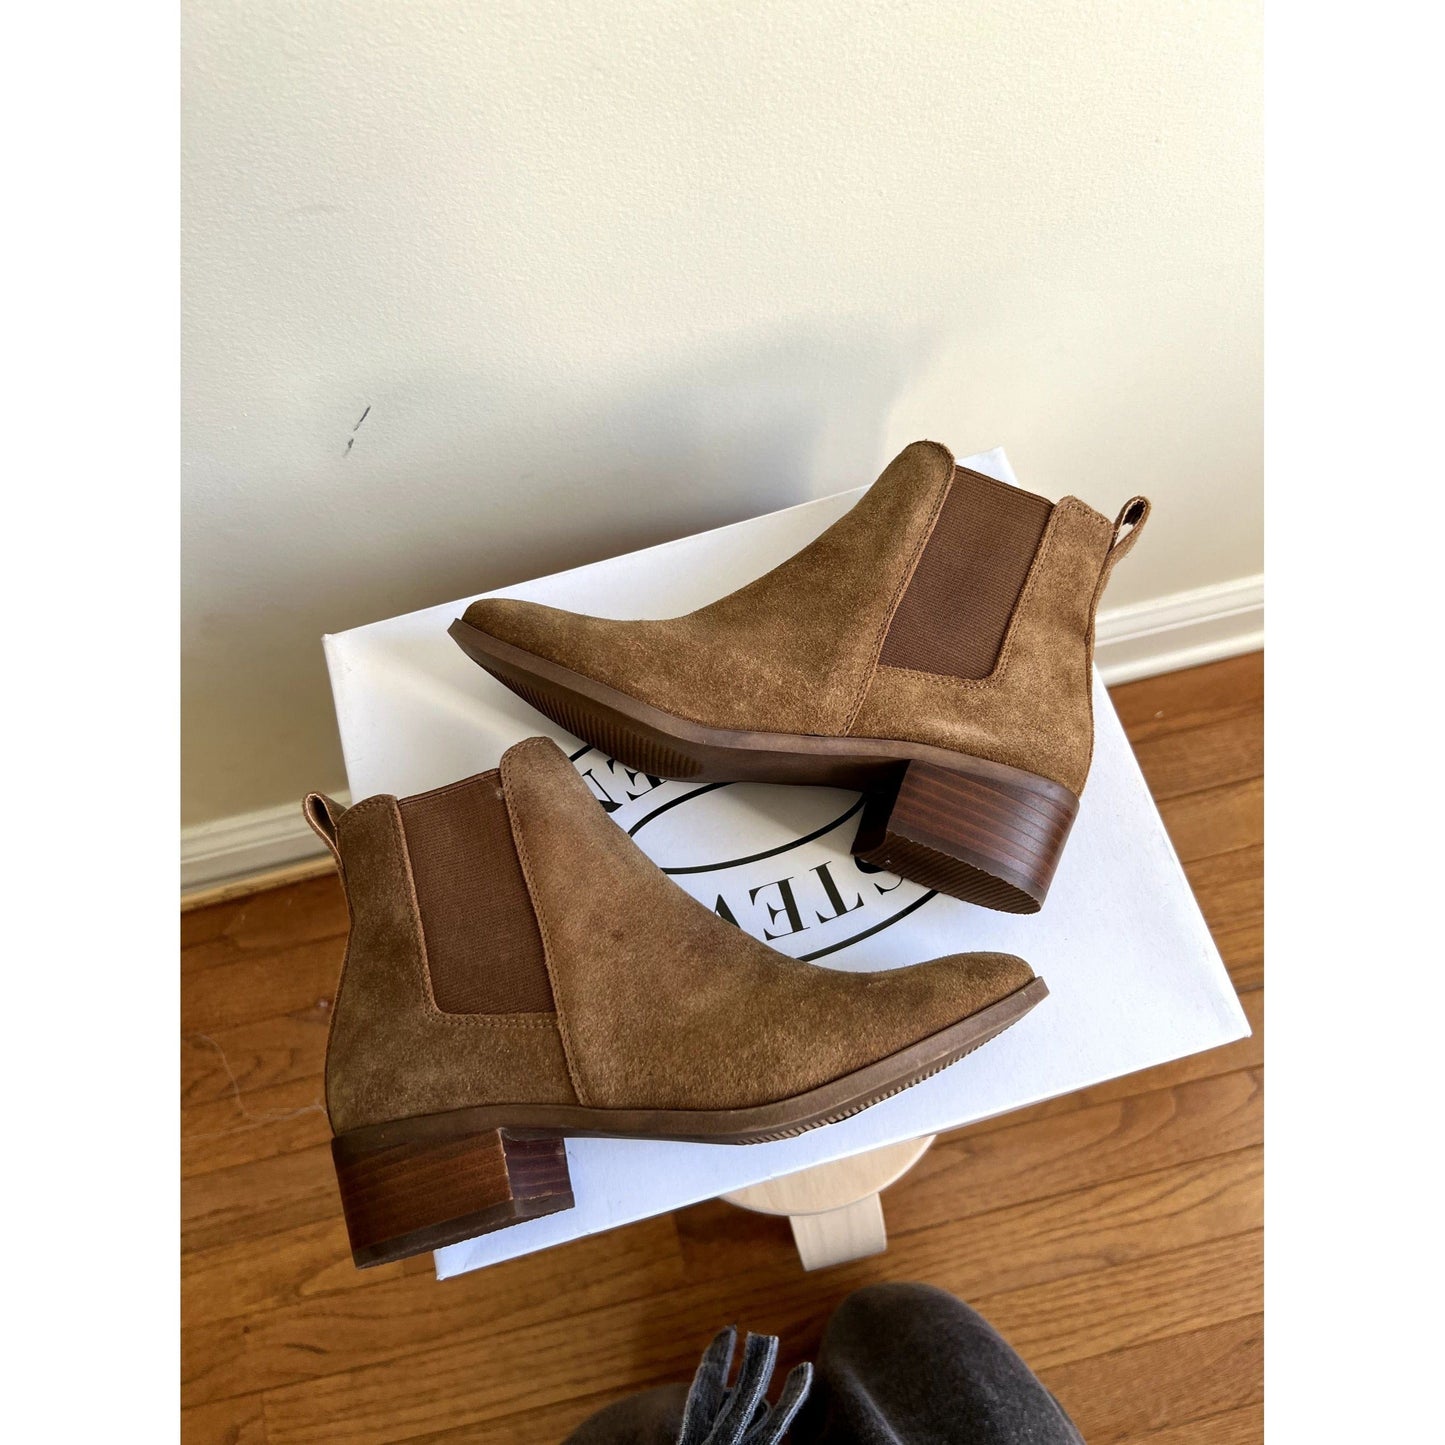 Steve Madden New In Box Boots Size 6.5